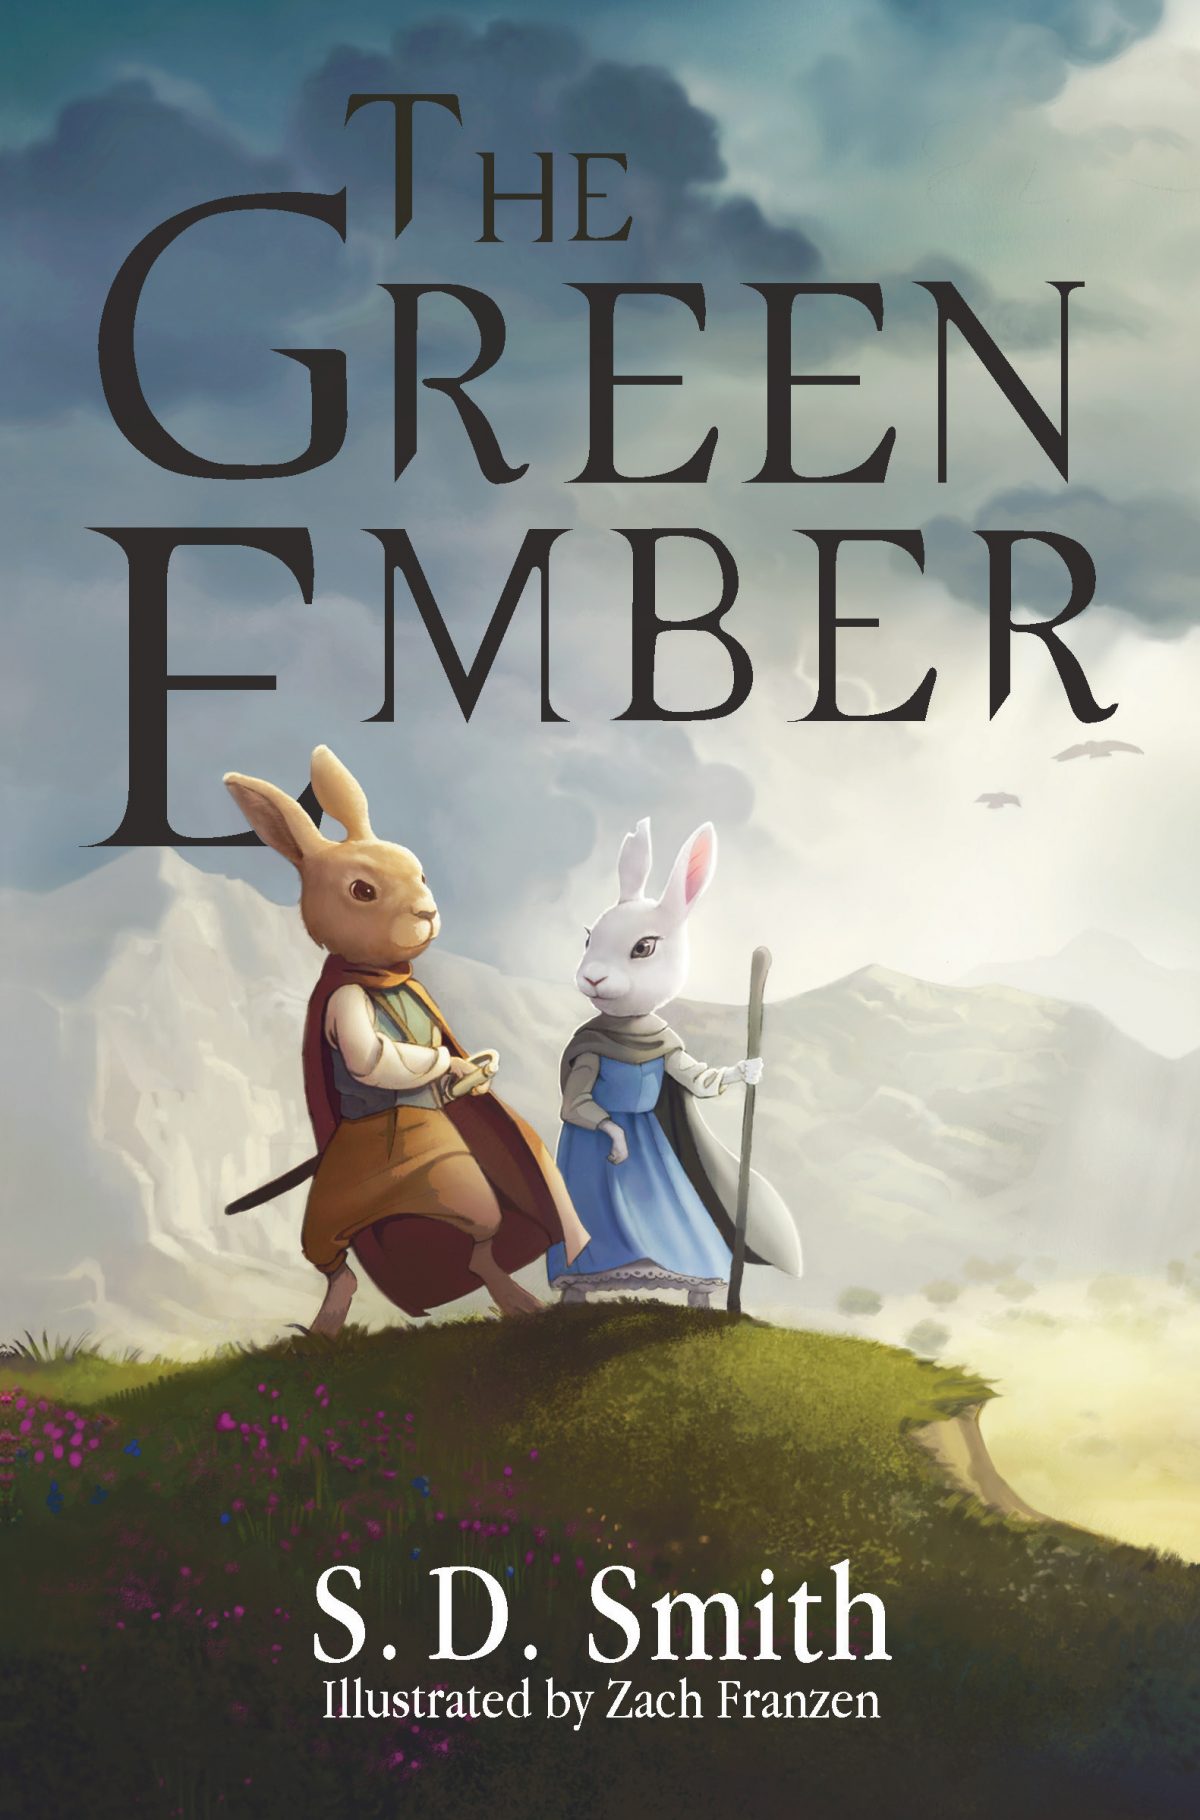 ember and greens